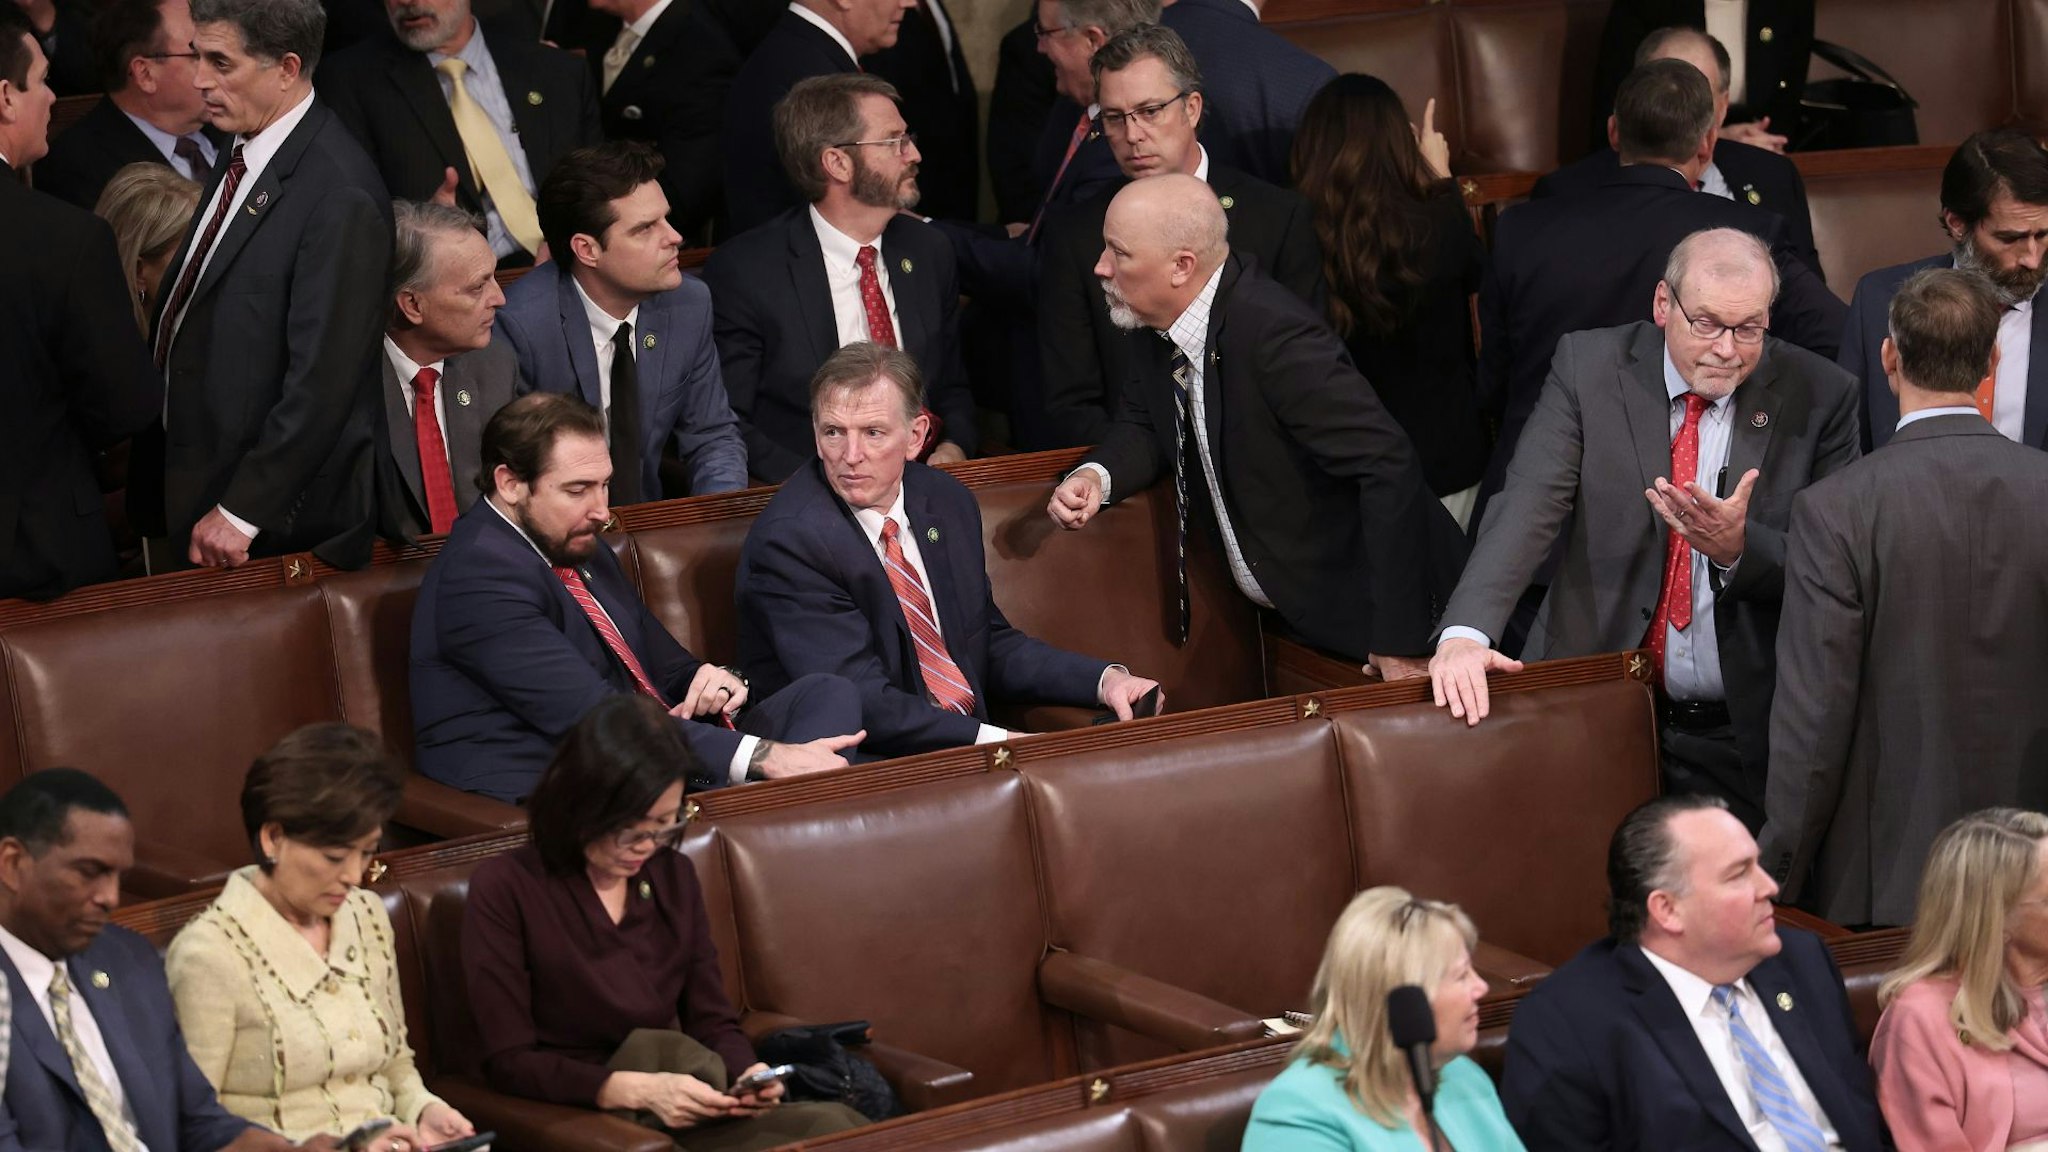 WASHINGTON, DC - JANUARY 04: House Republican, including members of the Freedom Caucus, wait for the results of a vote to adjourn following a day of votes for the new Speaker of the House at the U.S. Capitol on January 04, 2023 in Washington, DC. The House of Representatives is attempting to elect the next Speaker after House after Republican leader Kevin McCarthy (R-CA) has failed to earn more than 218 votes on six ballots over two days, the first time in 100 years that the Speaker was not elected on the first ballot.